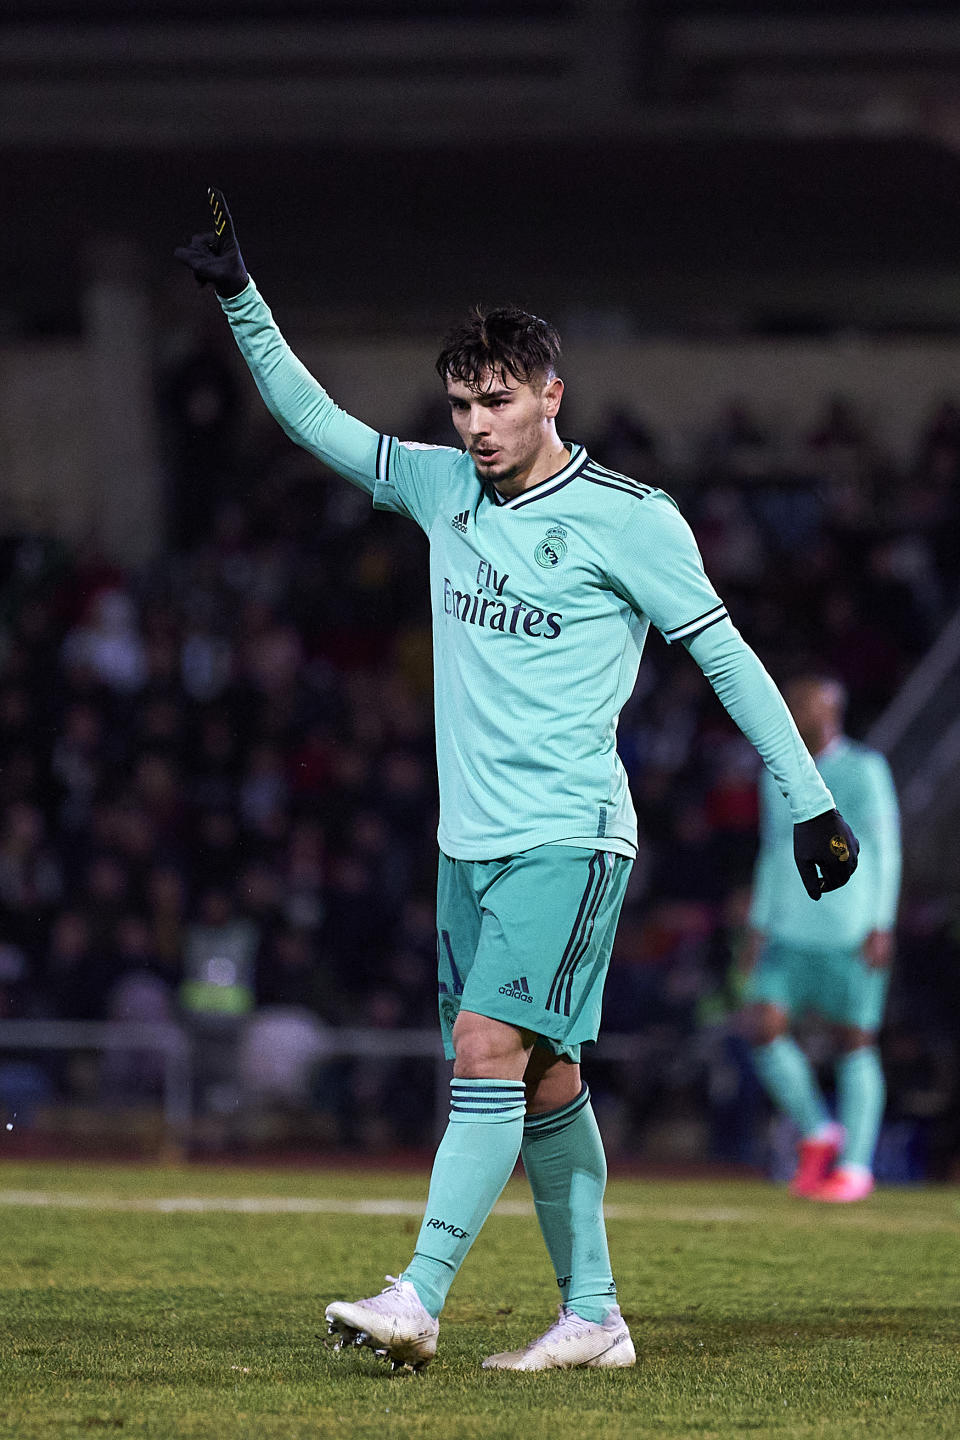 SALAMANCA, SPAIN - JANUARY 22: Brahim Diaz of Real Madrid CF celebrates after scoring his team's third goal during the Copa del Rey round of 32 match between Unionistas CF and Real Madrid CF at stadium of Las Pistas on January 22, 2020 in Salamanca, Spain. (Photo by Quality Sport Images/Getty Images)